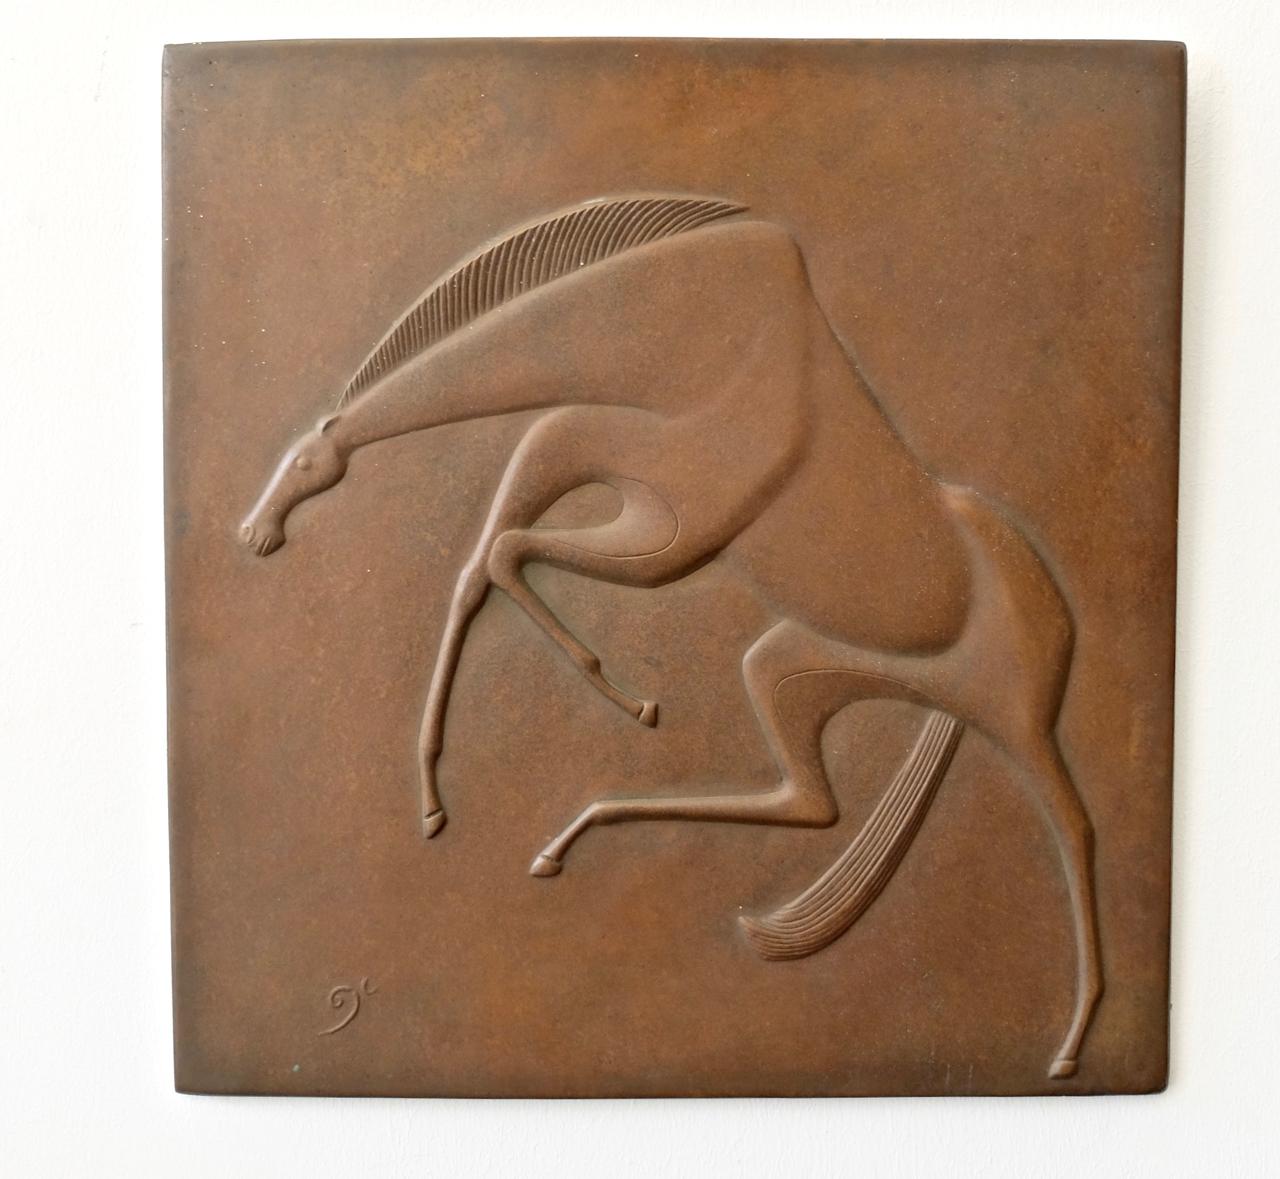 Artist : GERTRUD KORTENBACH 1924 Solingen - 1960 Solingen
Title: 'Jumping Horse' signed with monogram on front 
Material: Bronze, brown patina. Part. with traces of oxidation.
Measurements: H. 36 cm, W. 34 cm, D. 1 cm. 

GERTRUD KORTENBACH was a